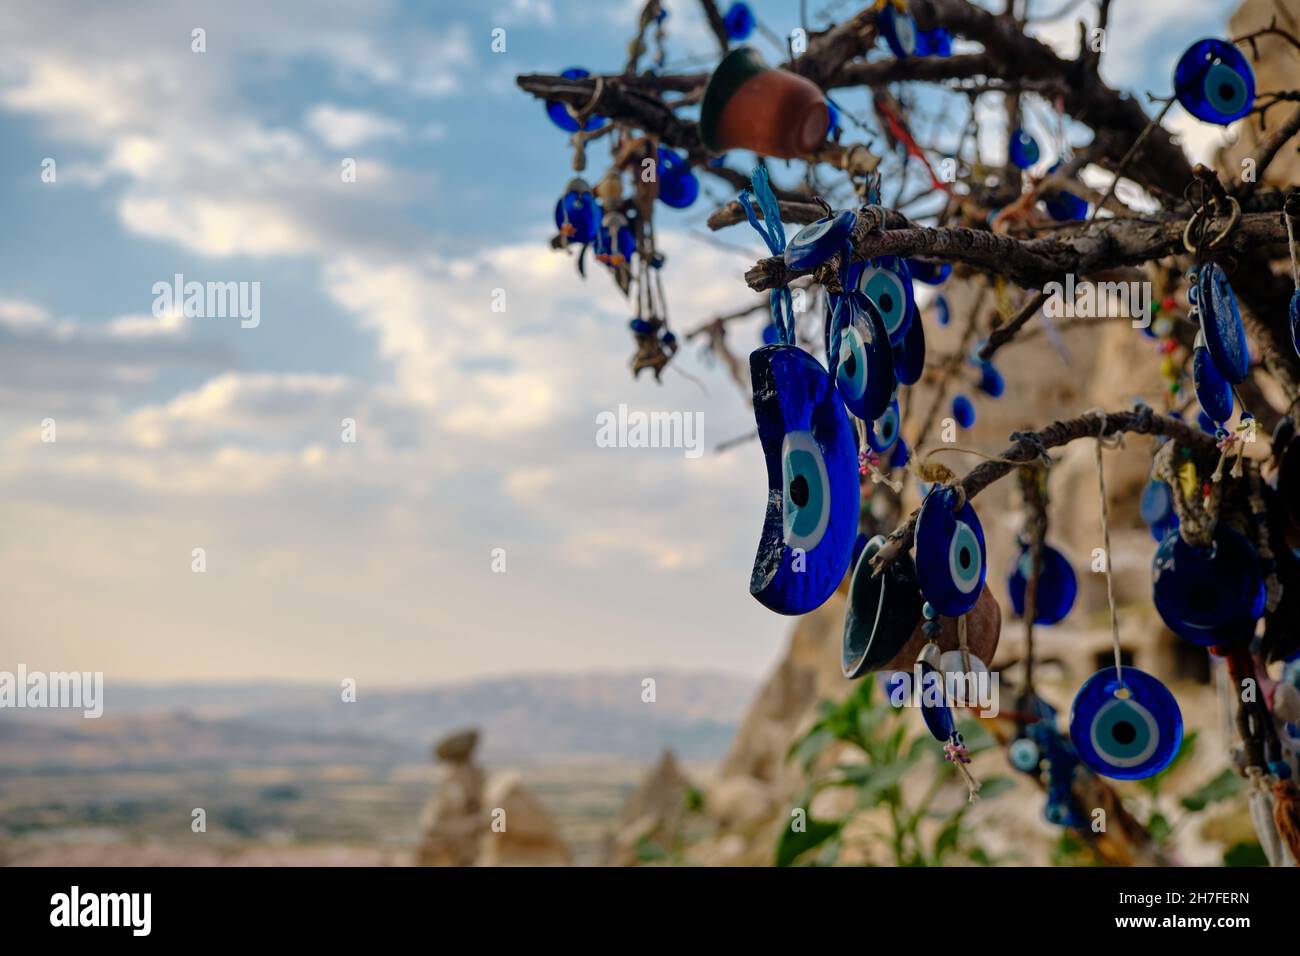 large groups of blue bead worn against the evil eye hanging on trees in edge castle (uchisar) in Cappadocia, gore in Turkey with dramatic cloudscape Stock Photo